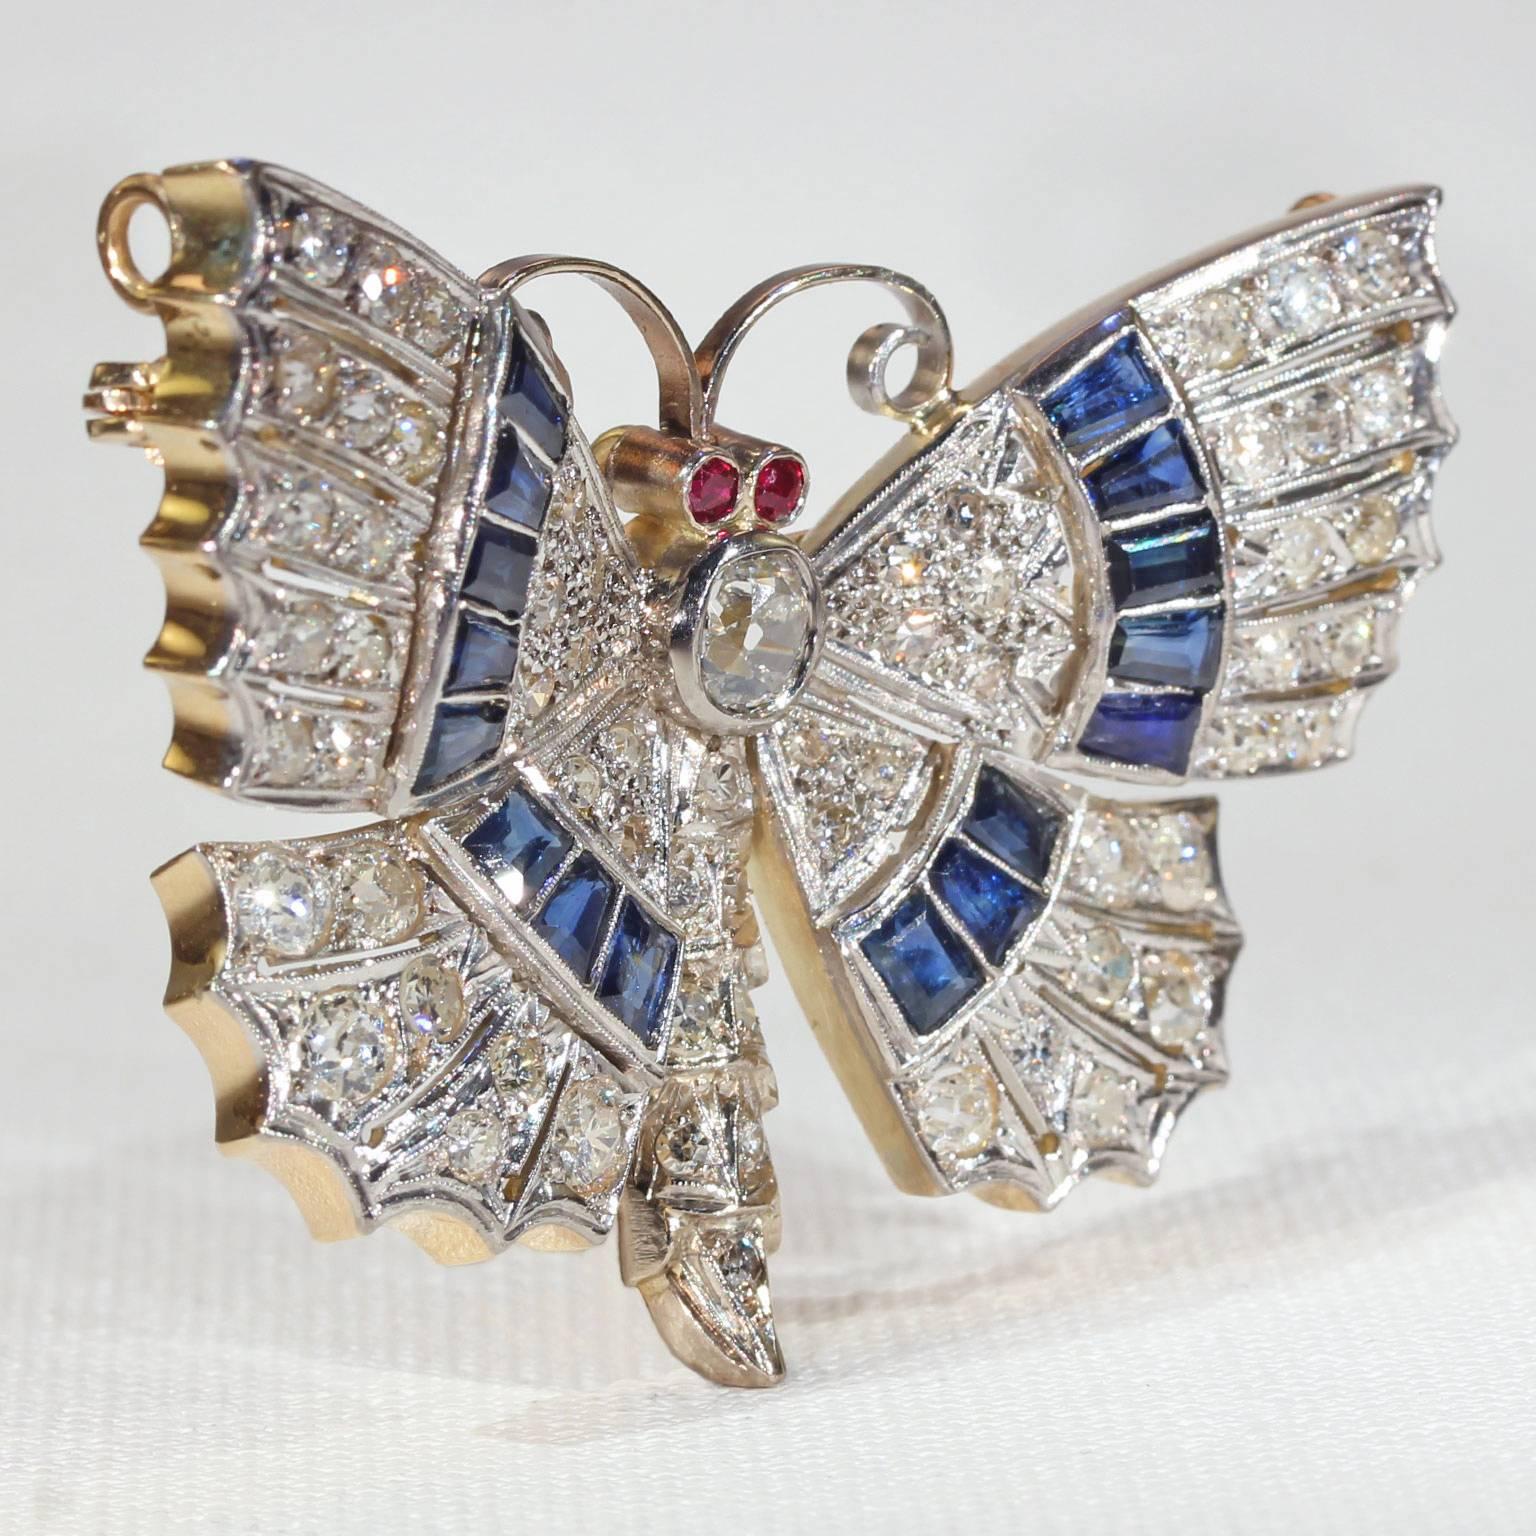 Hand crafted around 1930, this breathtaking butterfly brooch and pendant is done in 18 karat white and yellow gold; it showcases 63 Old European and brilliant cut diamonds that total approximately 3.85 carats. There are also 16 rectangular and